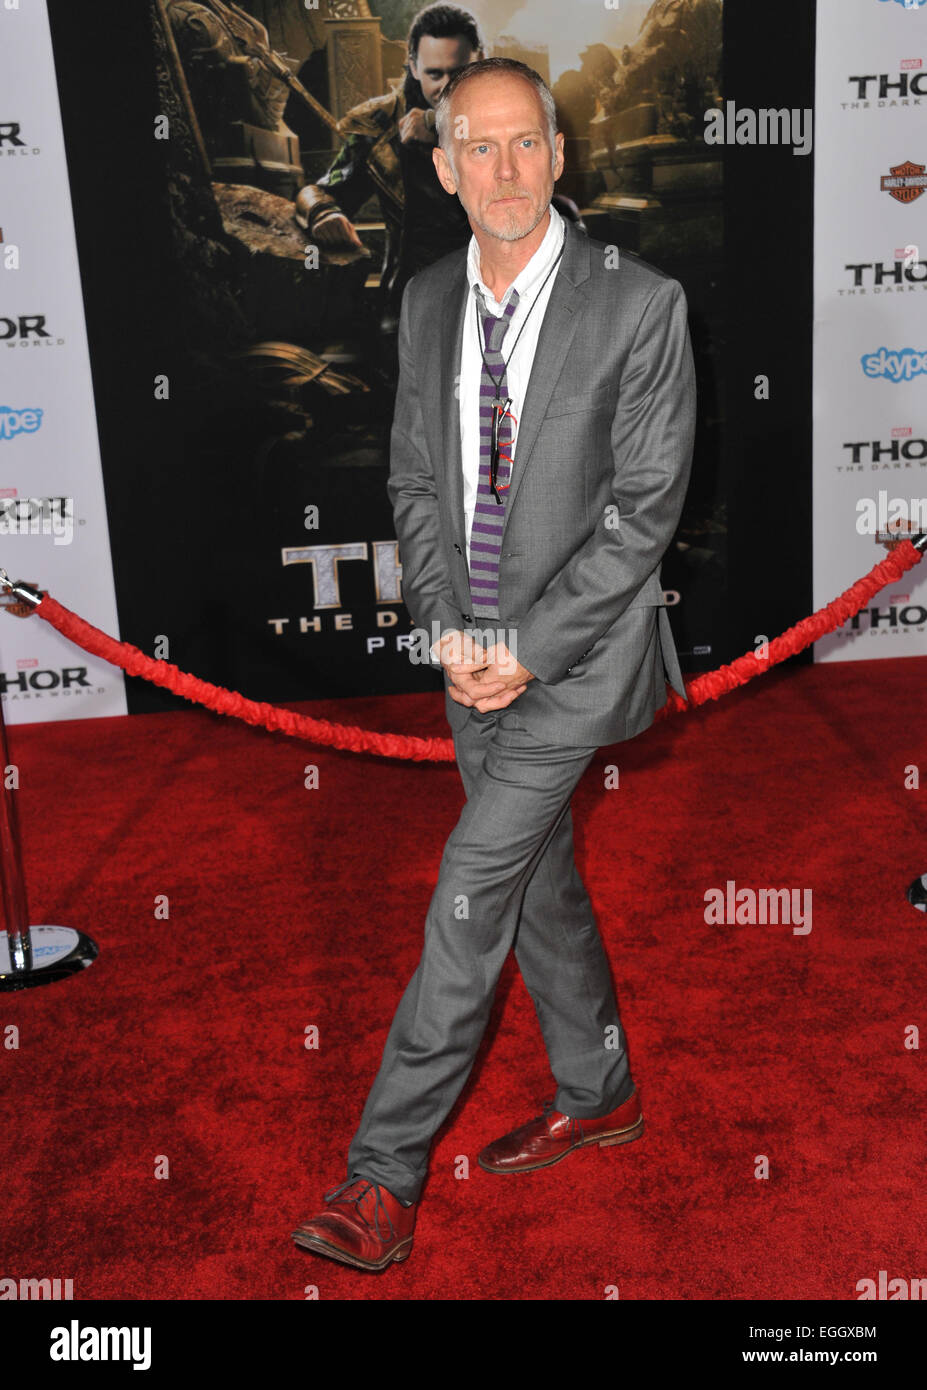 LOS ANGELES, CA - NOVEMBER 4, 2013: Director Alan Taylor at the US premiere of his movie 'Thor: The Dark World' at the El Capitan Theatre, Hollywood. Stock Photo